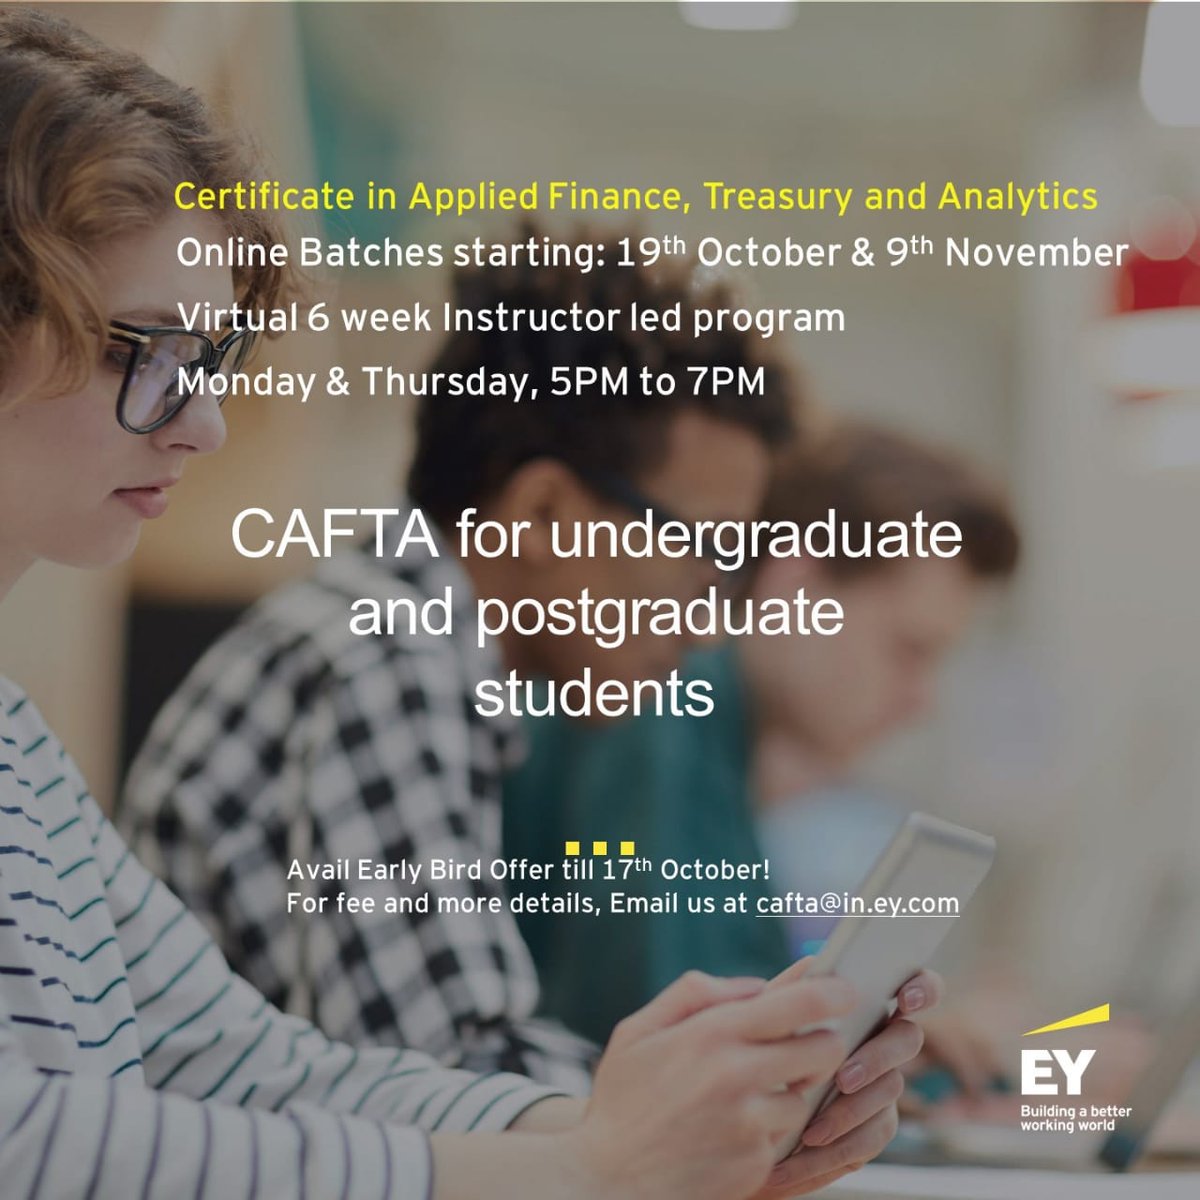 (1/n)Ever heard of an upskill program that offers practical industry insights from subject matter experts, internship opportunities, networking opportunities, mentoring and much more altogether! If not, then check out EY’s CAFTA!
#EYCAFTA